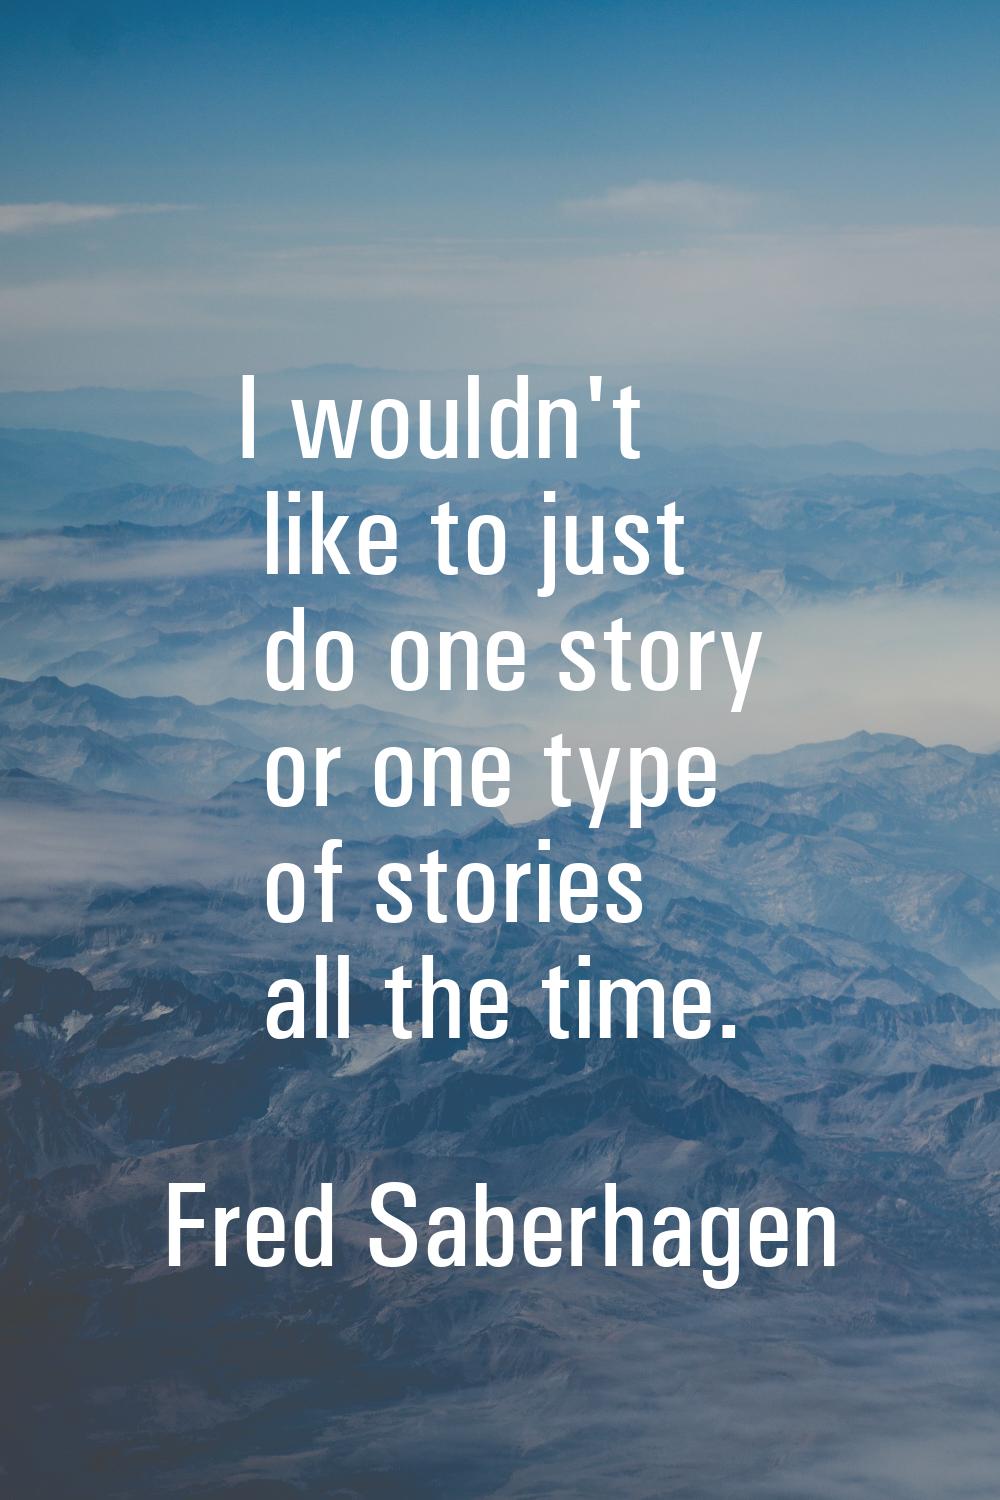 I wouldn't like to just do one story or one type of stories all the time.